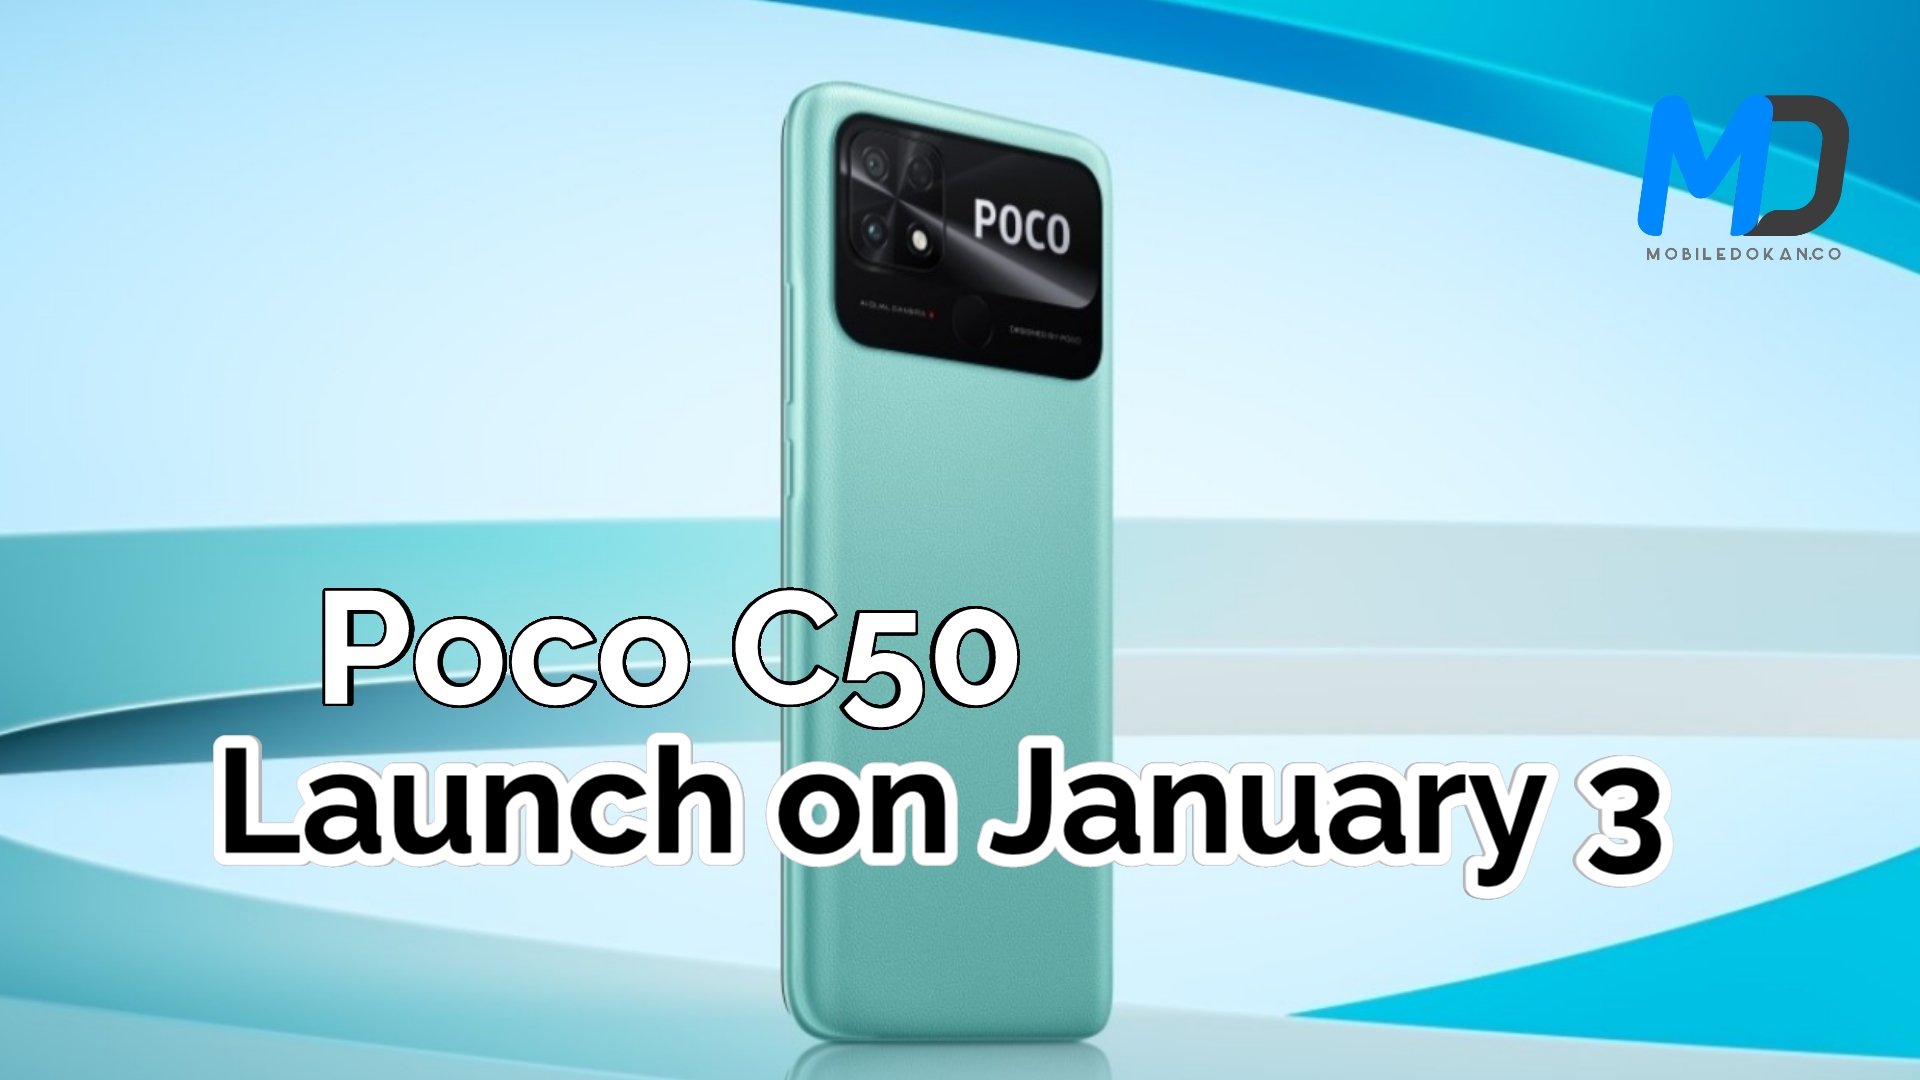 Poco C50 rumored to launch on the following January 3